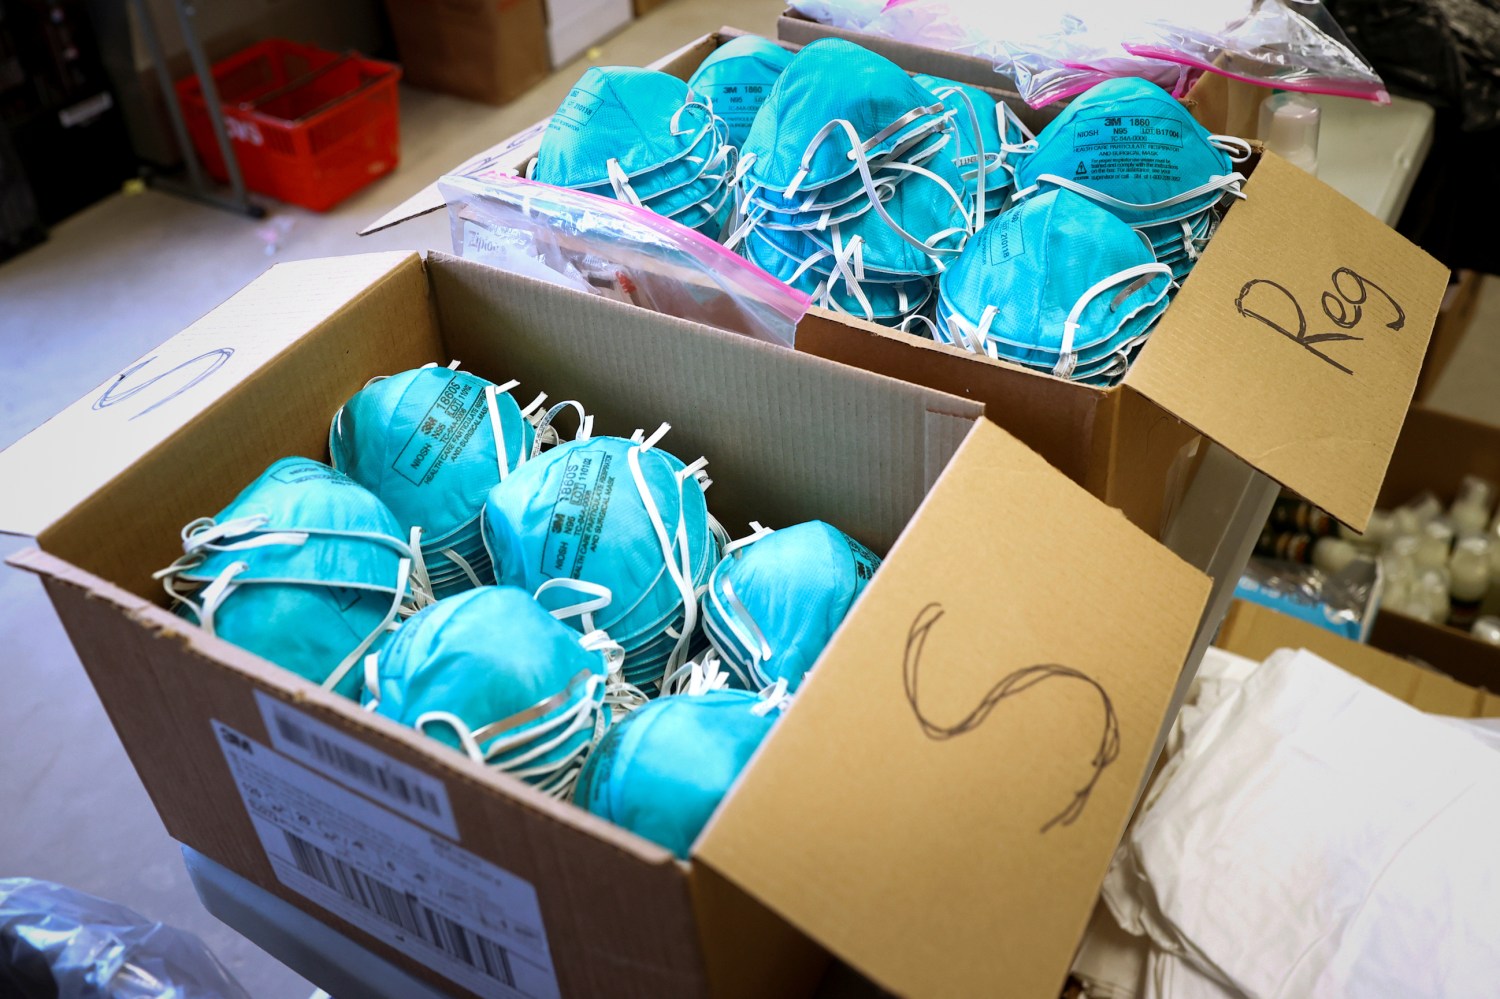 FILE PHOTO: Boxes of N95 protective masks for use by medical field personnel are seen at a New York State emergency operations incident command center during the coronavirus outbreak in New Rochelle, New York, U.S., March 17, 2020. REUTERS/Mike Segar/File Photo